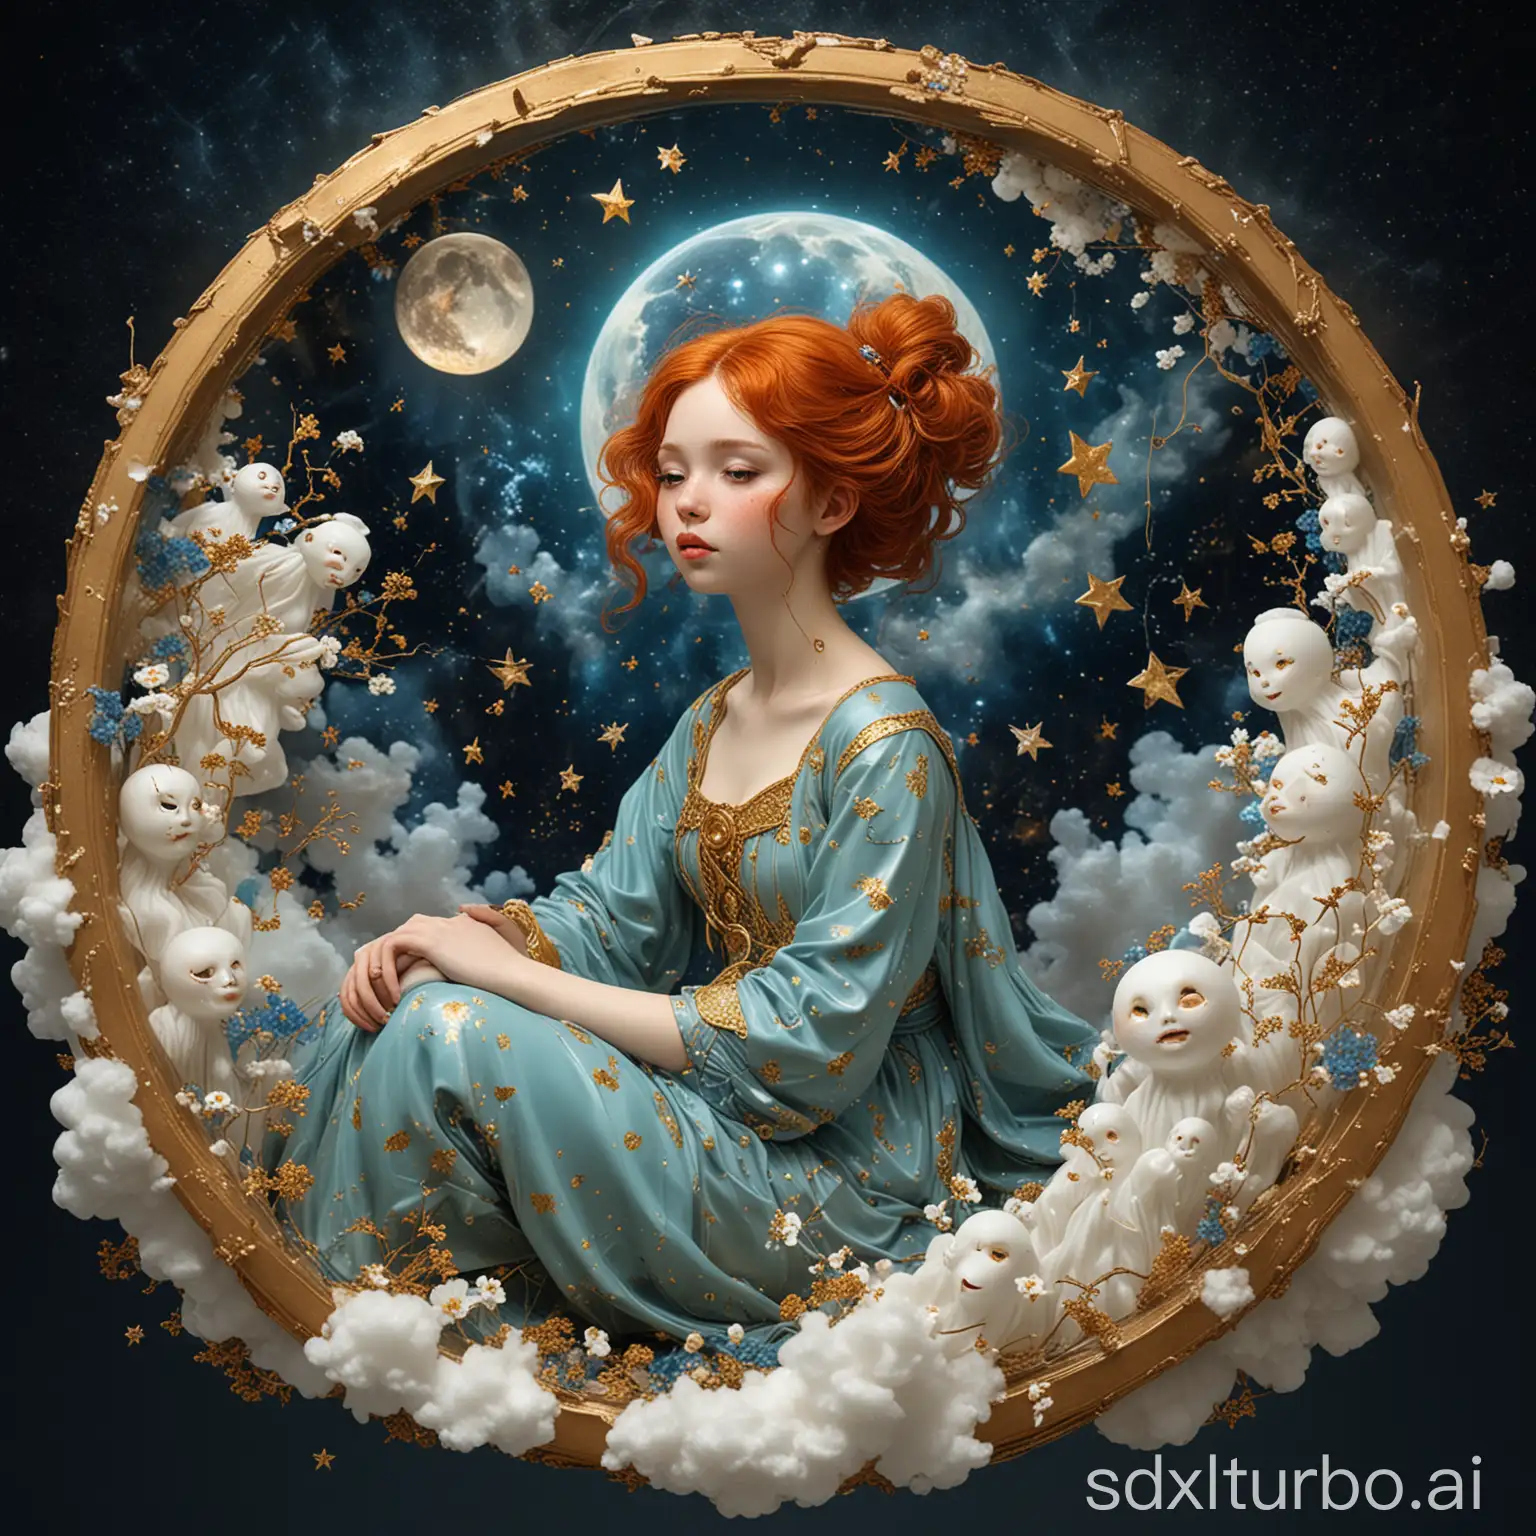 glazing complex masterpiece  on glittering   porcelain, kintsugi, cracked glass, caricatured  abstract expressionism stylized multilayered well-dressed ginger girl  sitting on floating moon surrounded by transparent  cotton cloud ghosts spirits in space  portrait by mucha klimt rockwell murakami  seveso Shaddy, , , forget-me-not flowers . , space, fairytale , , stars,  sharp eyes ,  stardust, celestial , glazing texture , cinematic masterpiece